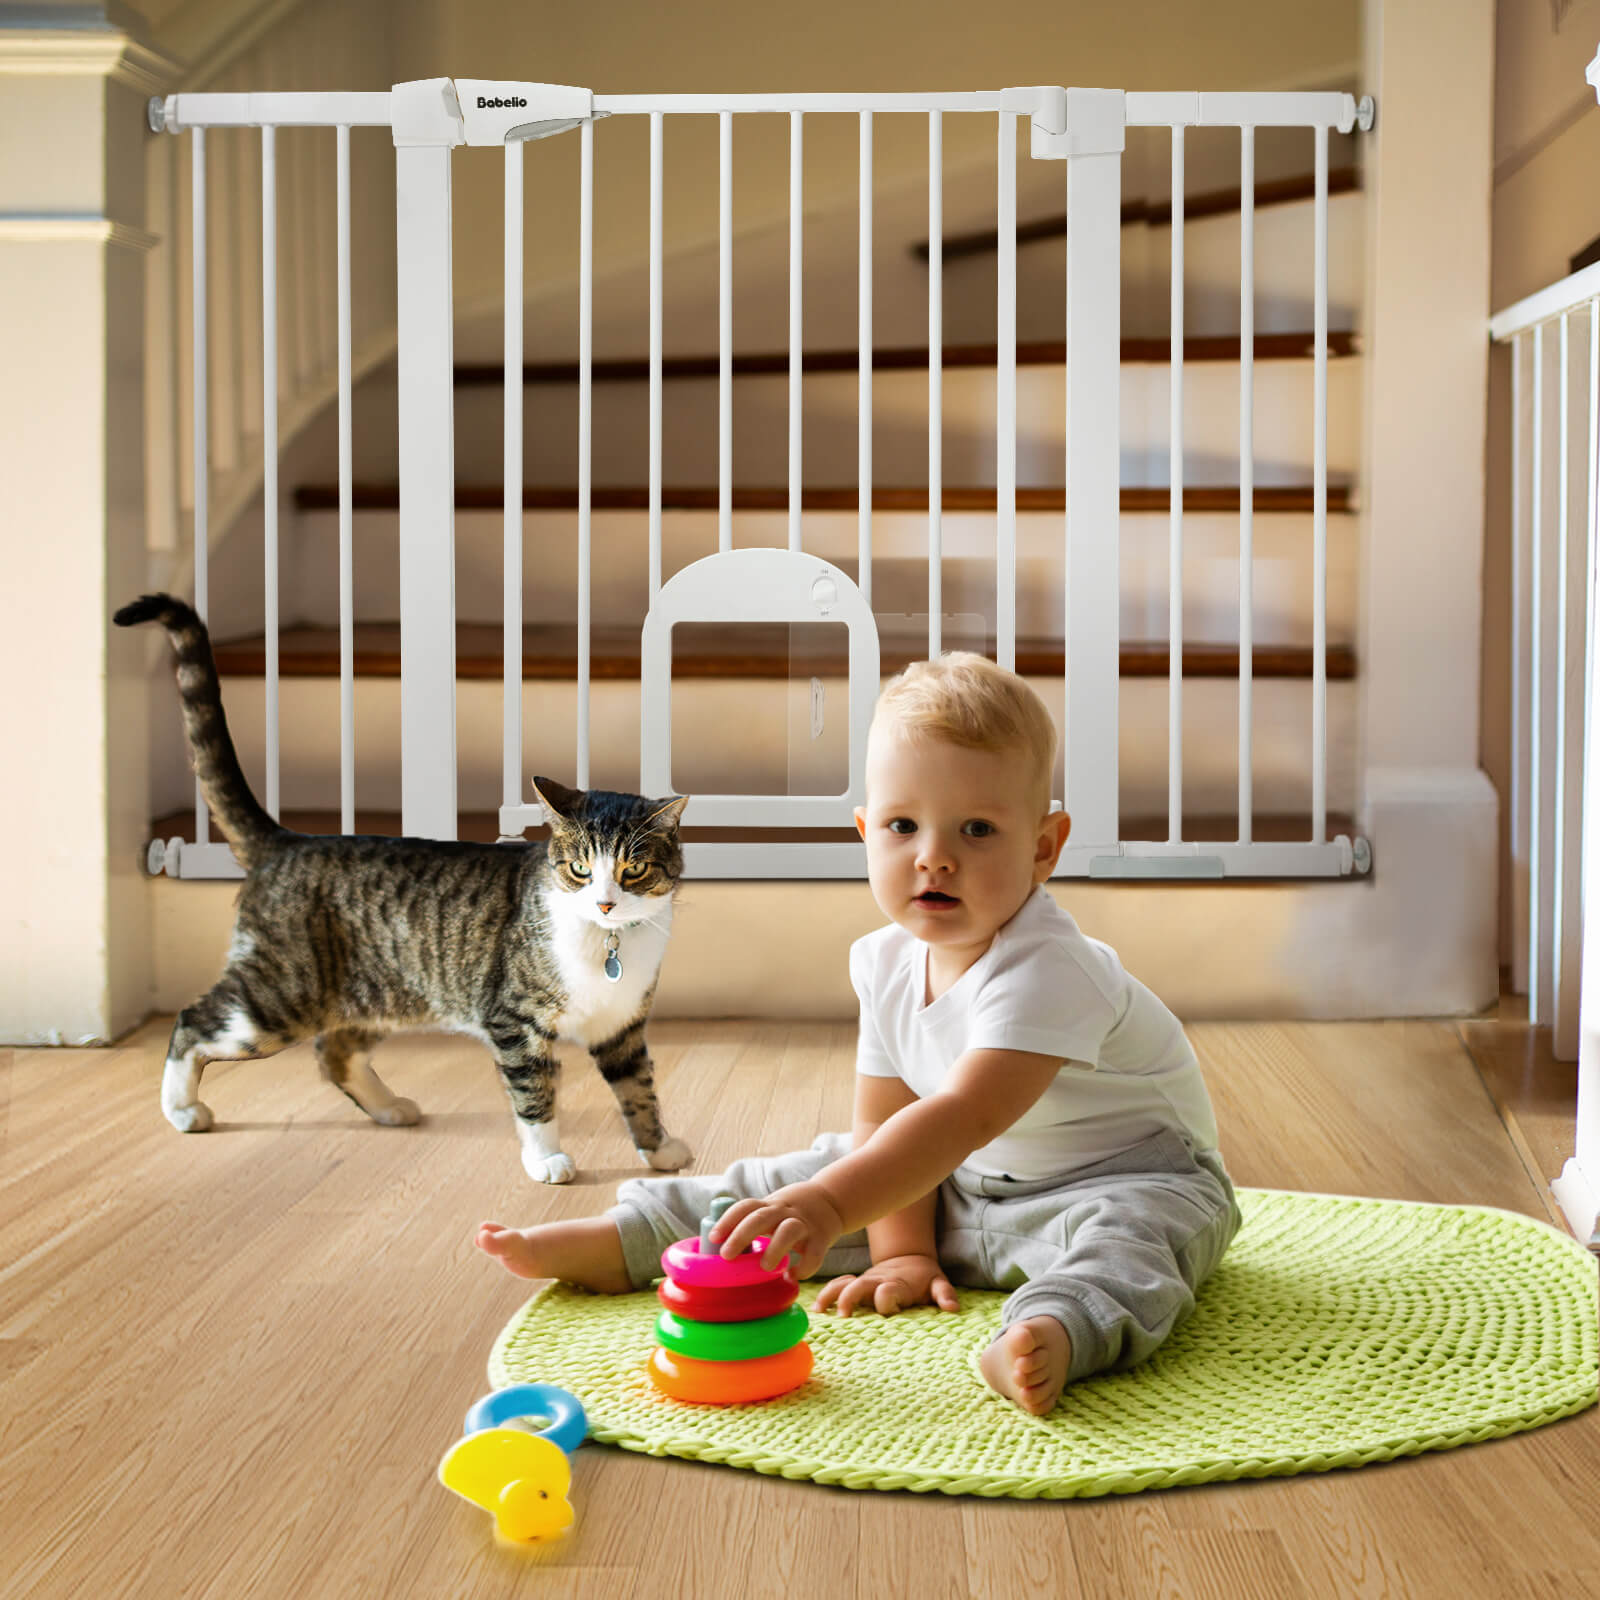 Babelio 29-48" Wide Baby and Pet Gate with Adjustable Cat Door – Easy One-Hand Open, Auto-Close, for Home Safety